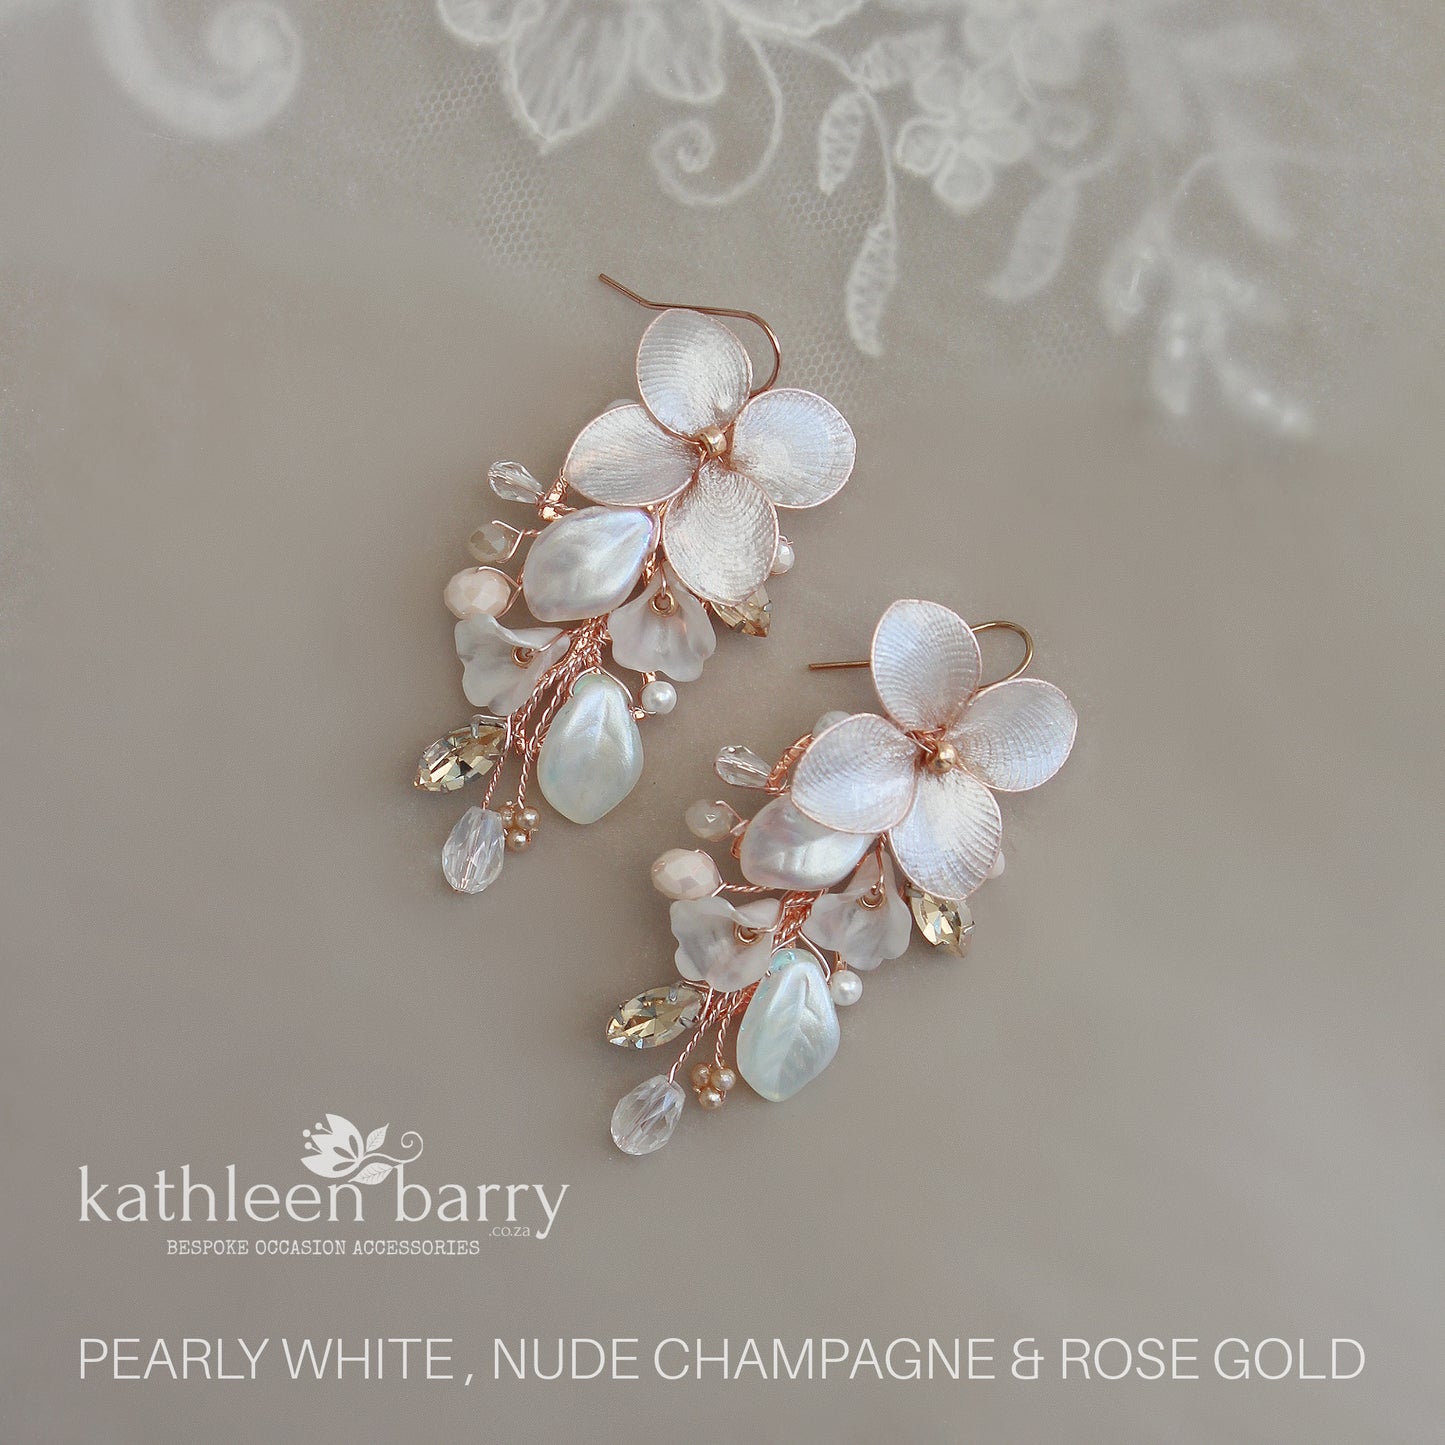 Cecile floral statement earrings - Floral, rhinestone and crystal & pearl- assorted colors available